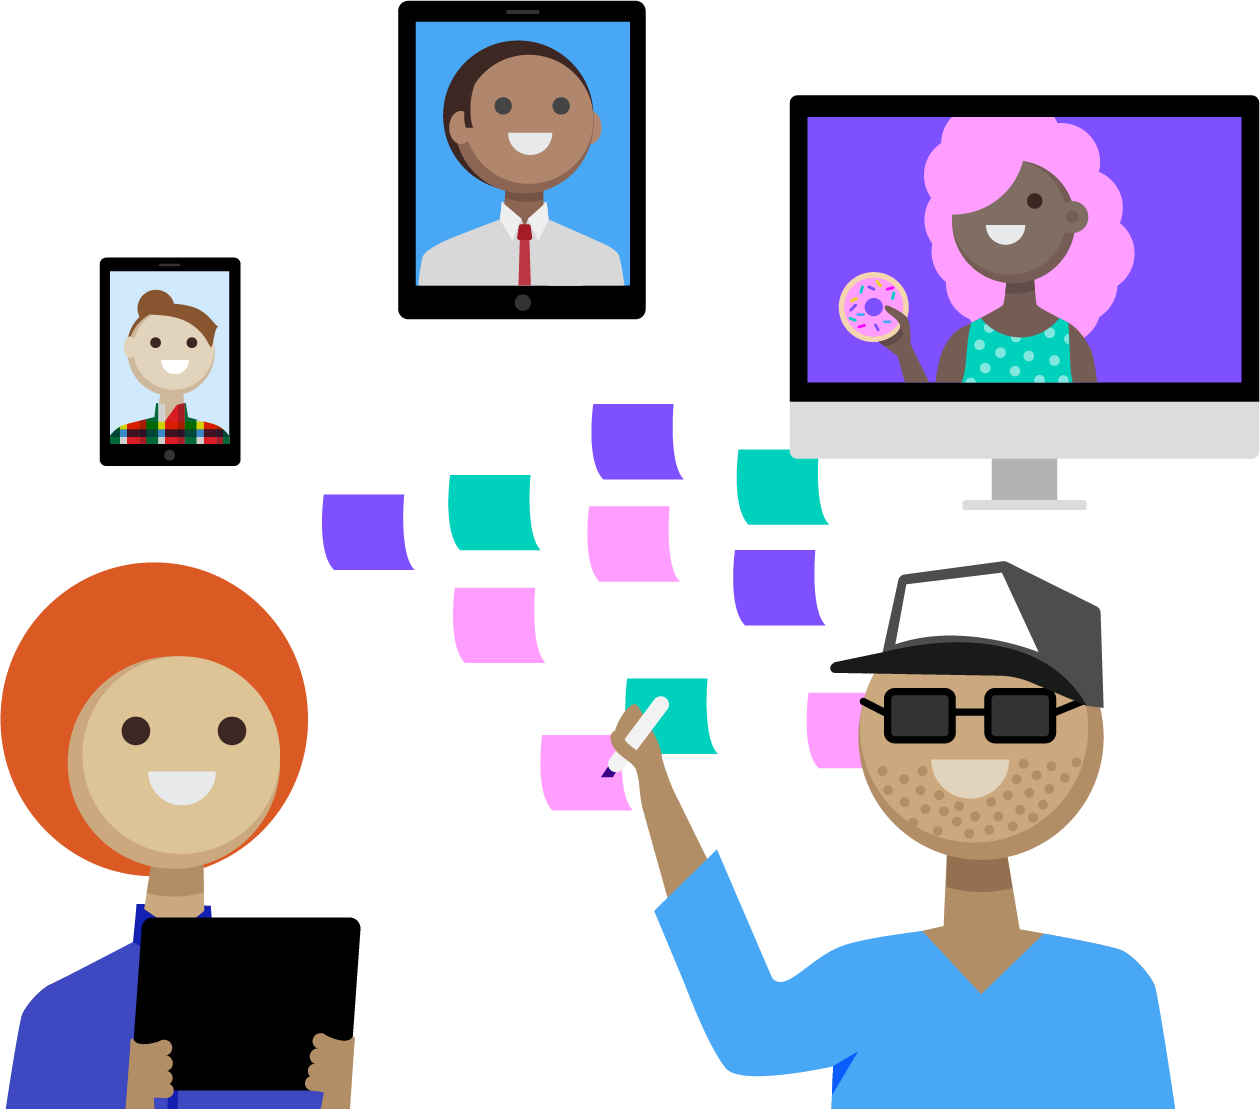 Illustration of two people in the foreground collaborating with other team members visible on screens.